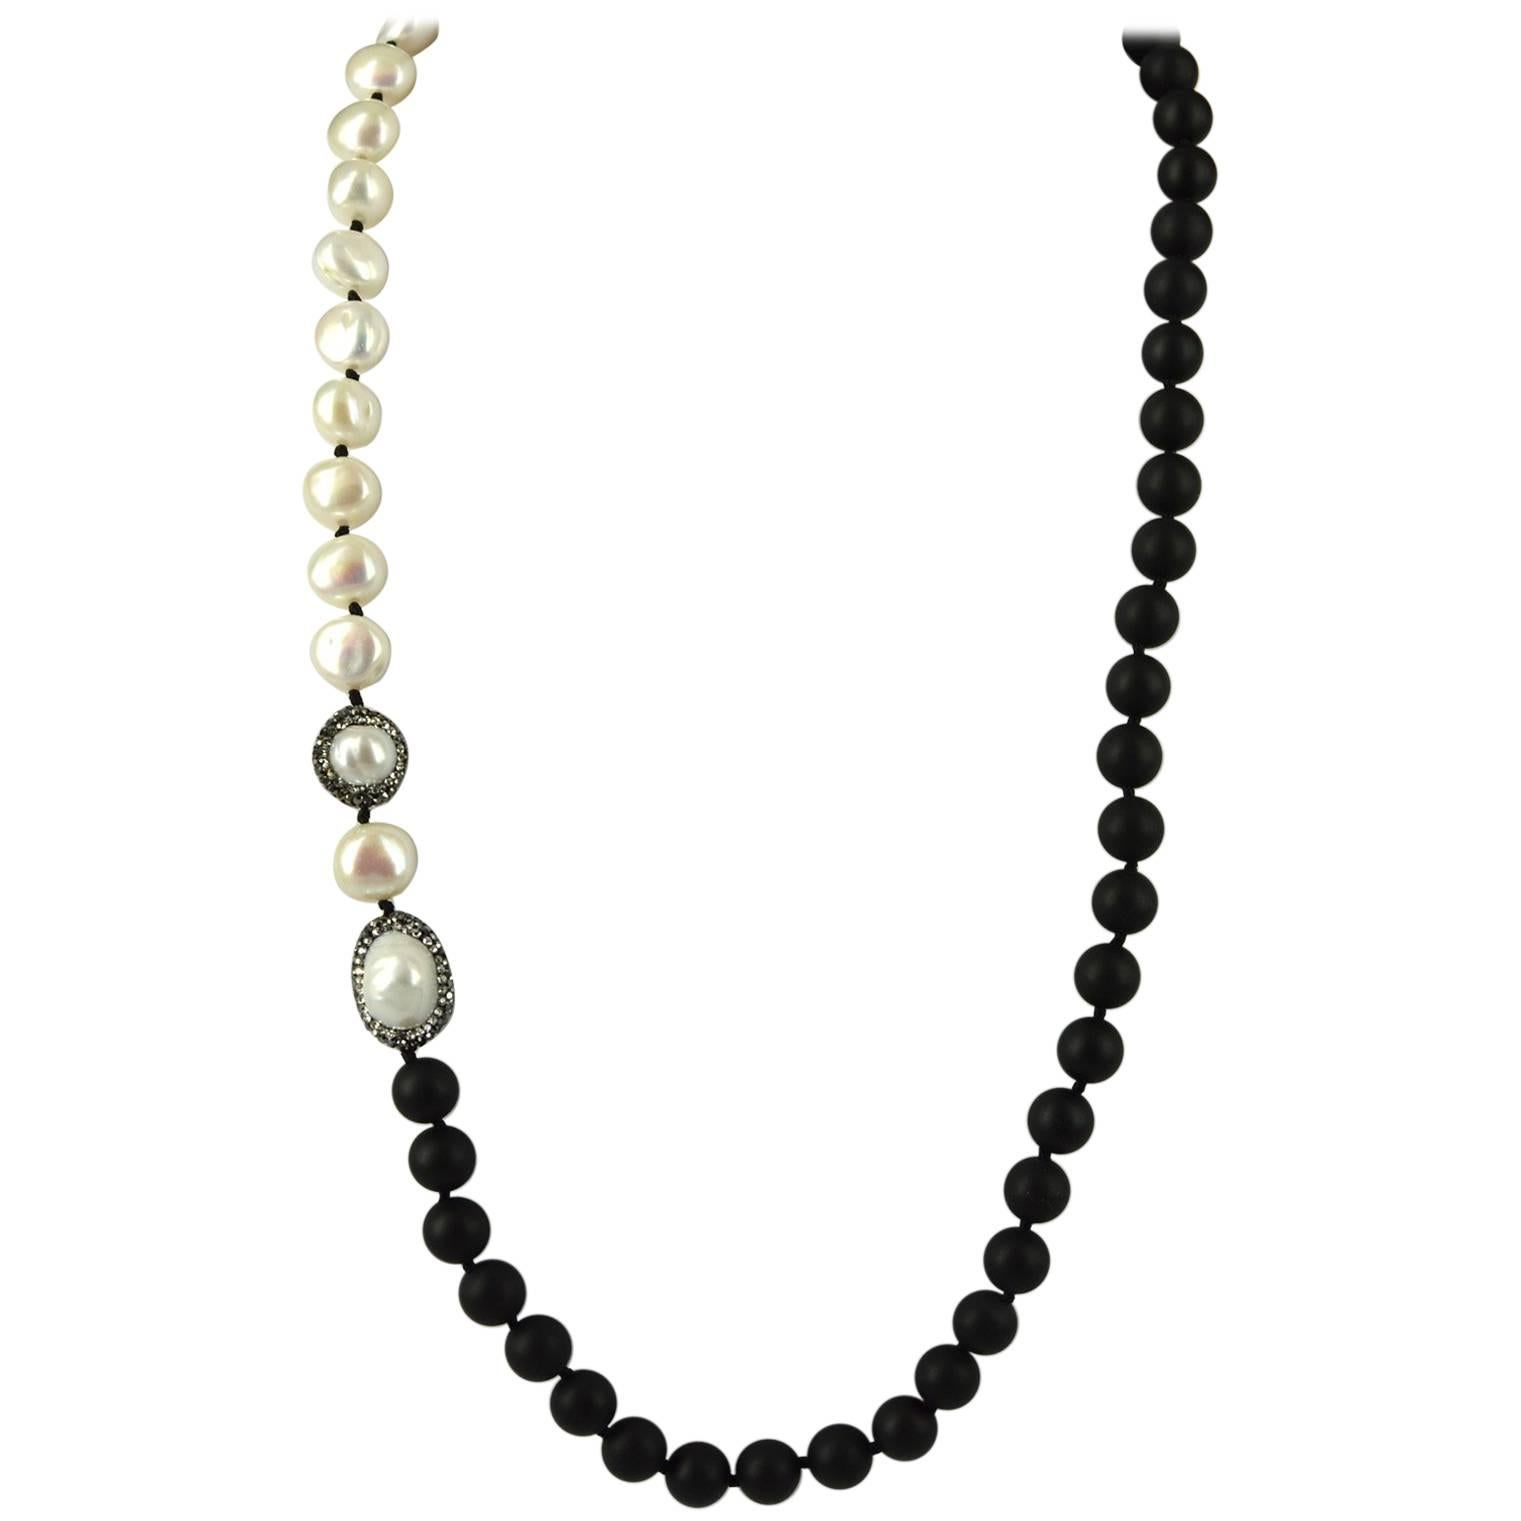 Decadent Jewels Matt Onyx Pearl Black and White Silver Necklace